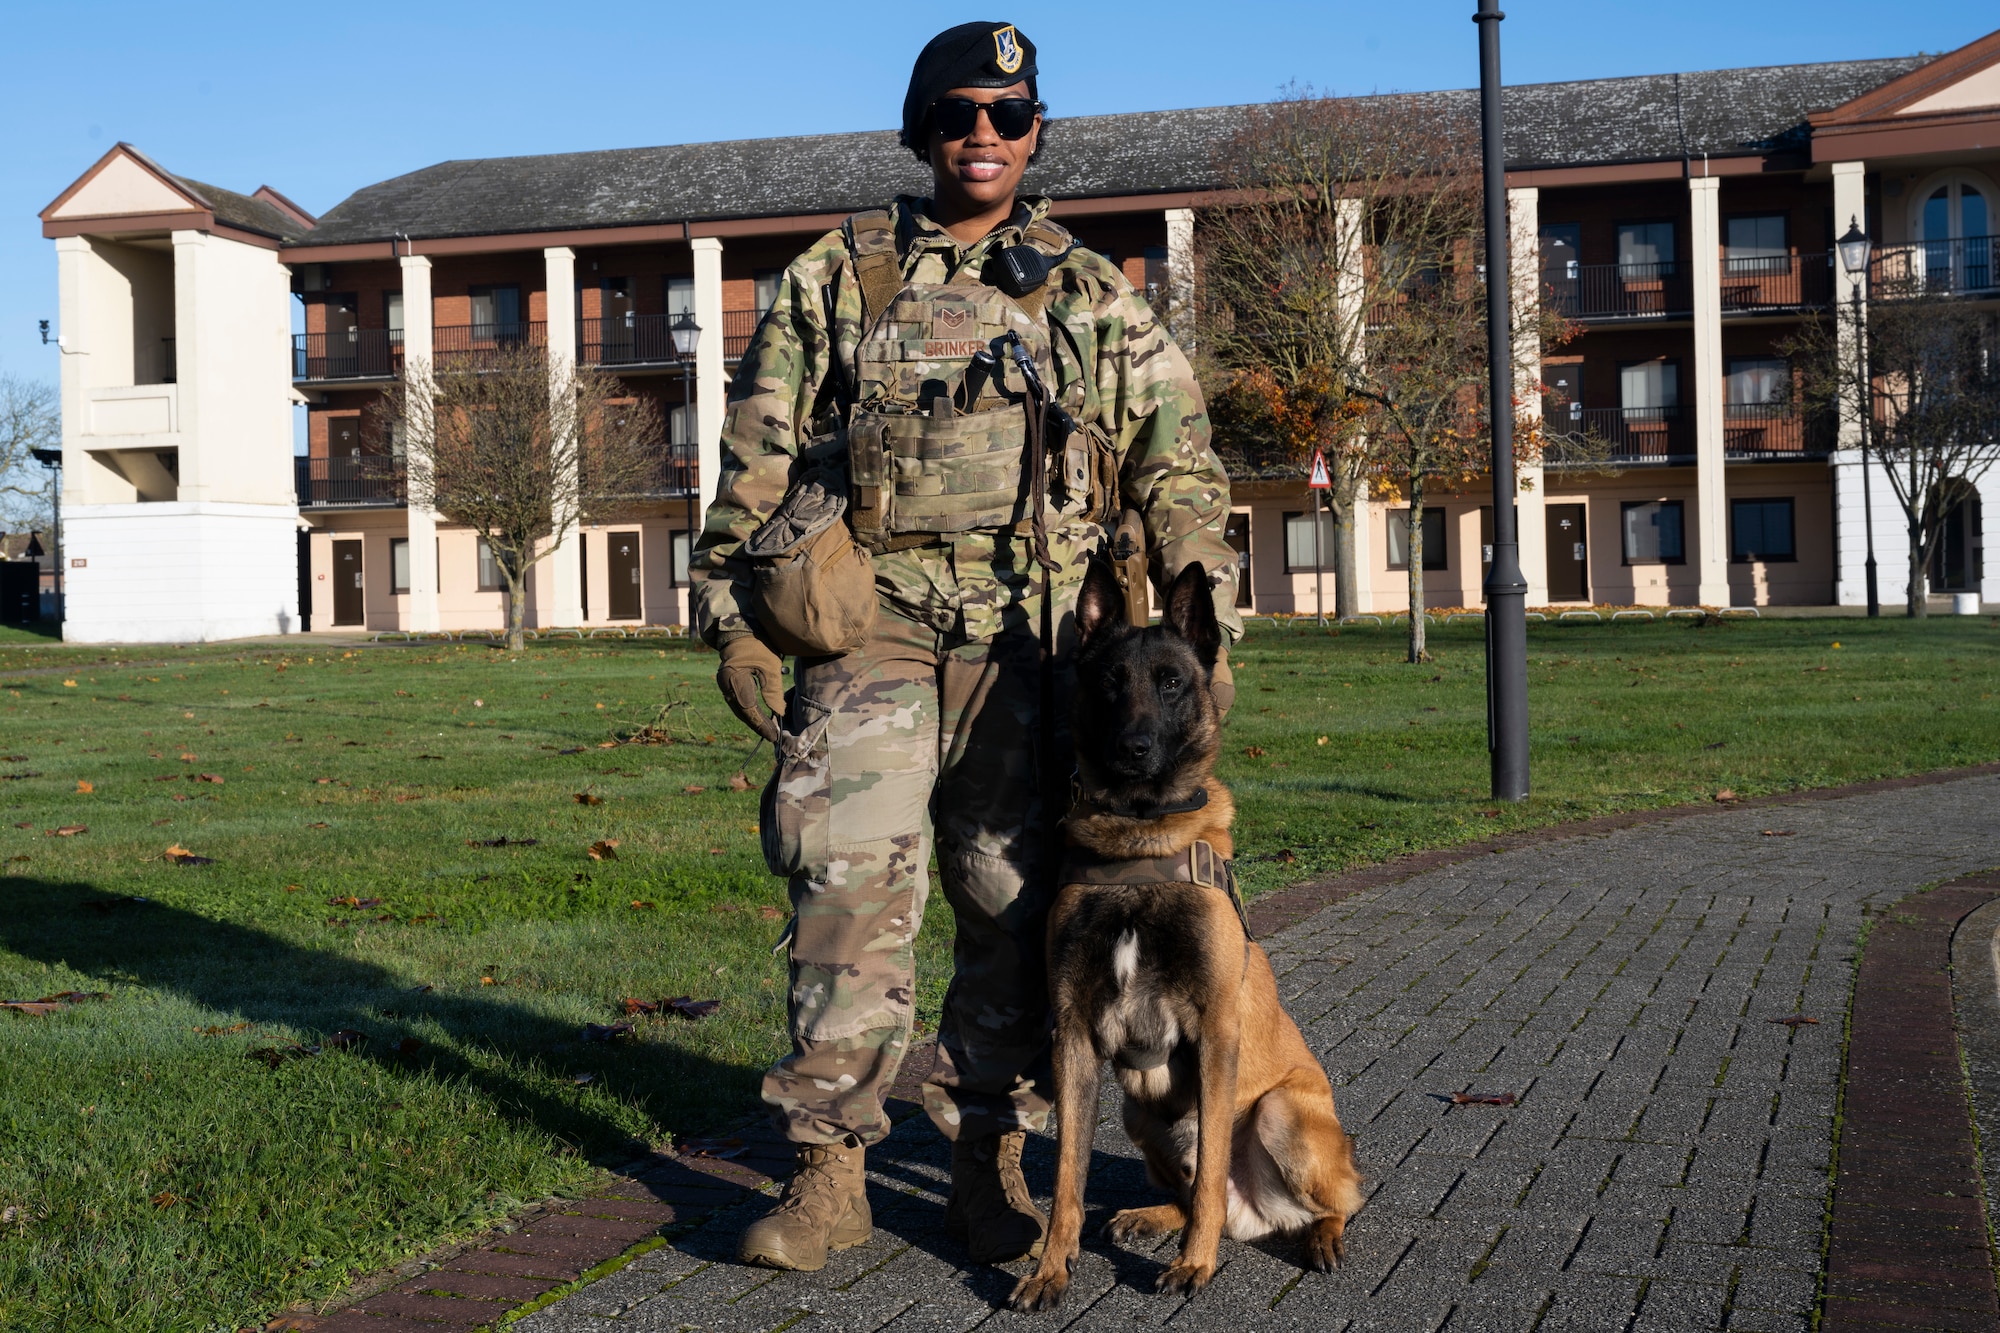 Staff Sgt. Jennifer Brinker, from San Diego, California, joined the Air Force in March of 2015 as a Security Forces trainee. She completed both Basic Military Training and Technical Training school before becoming a Defender.

“I worked with dogs before joining,” said Brinker. “I always wanted to serve in the military, so I was like, I get the best of both.”